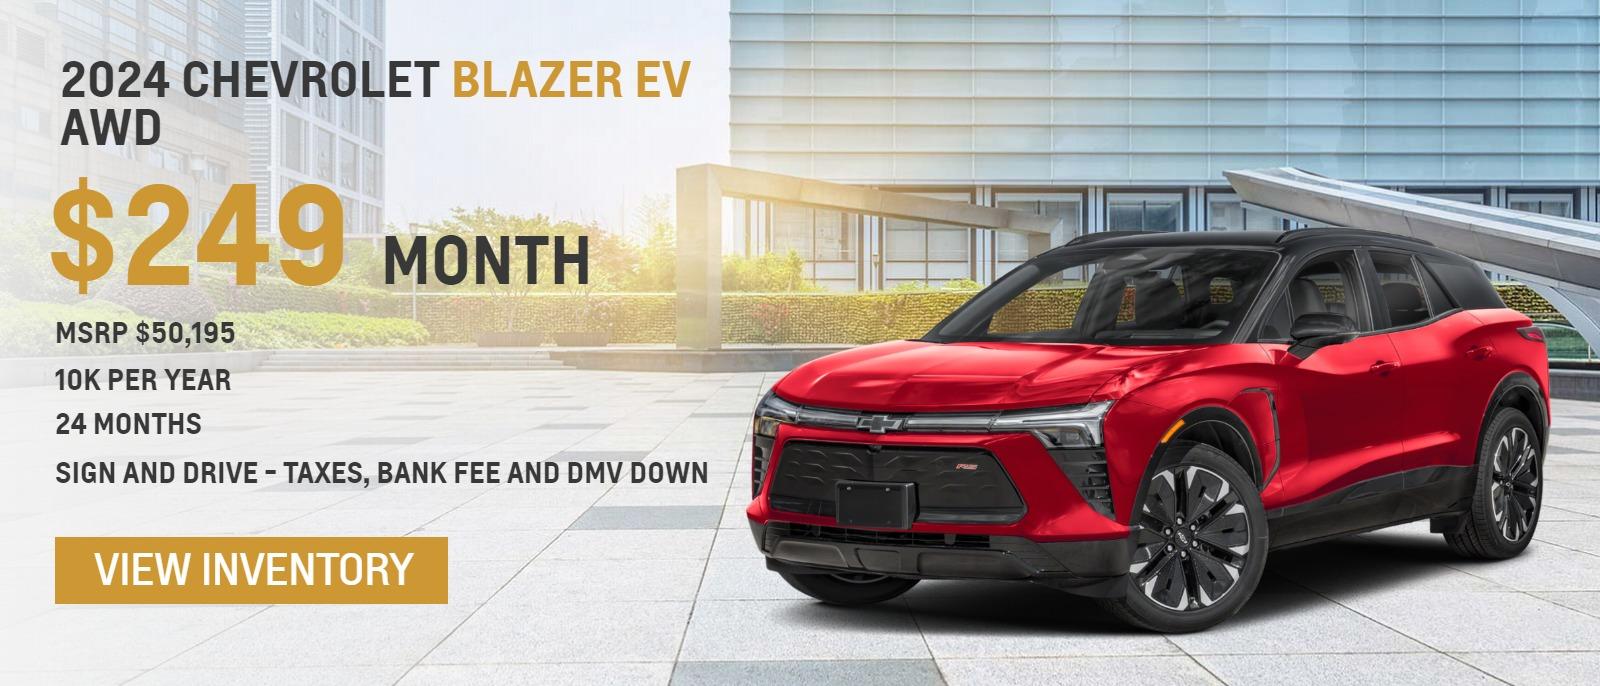 2024 Chevrolet Blazer EV AWD
MSRP $50,195.
10k per year
24 months
$249. month
sign and drive - taxes, bank fee and DMV down